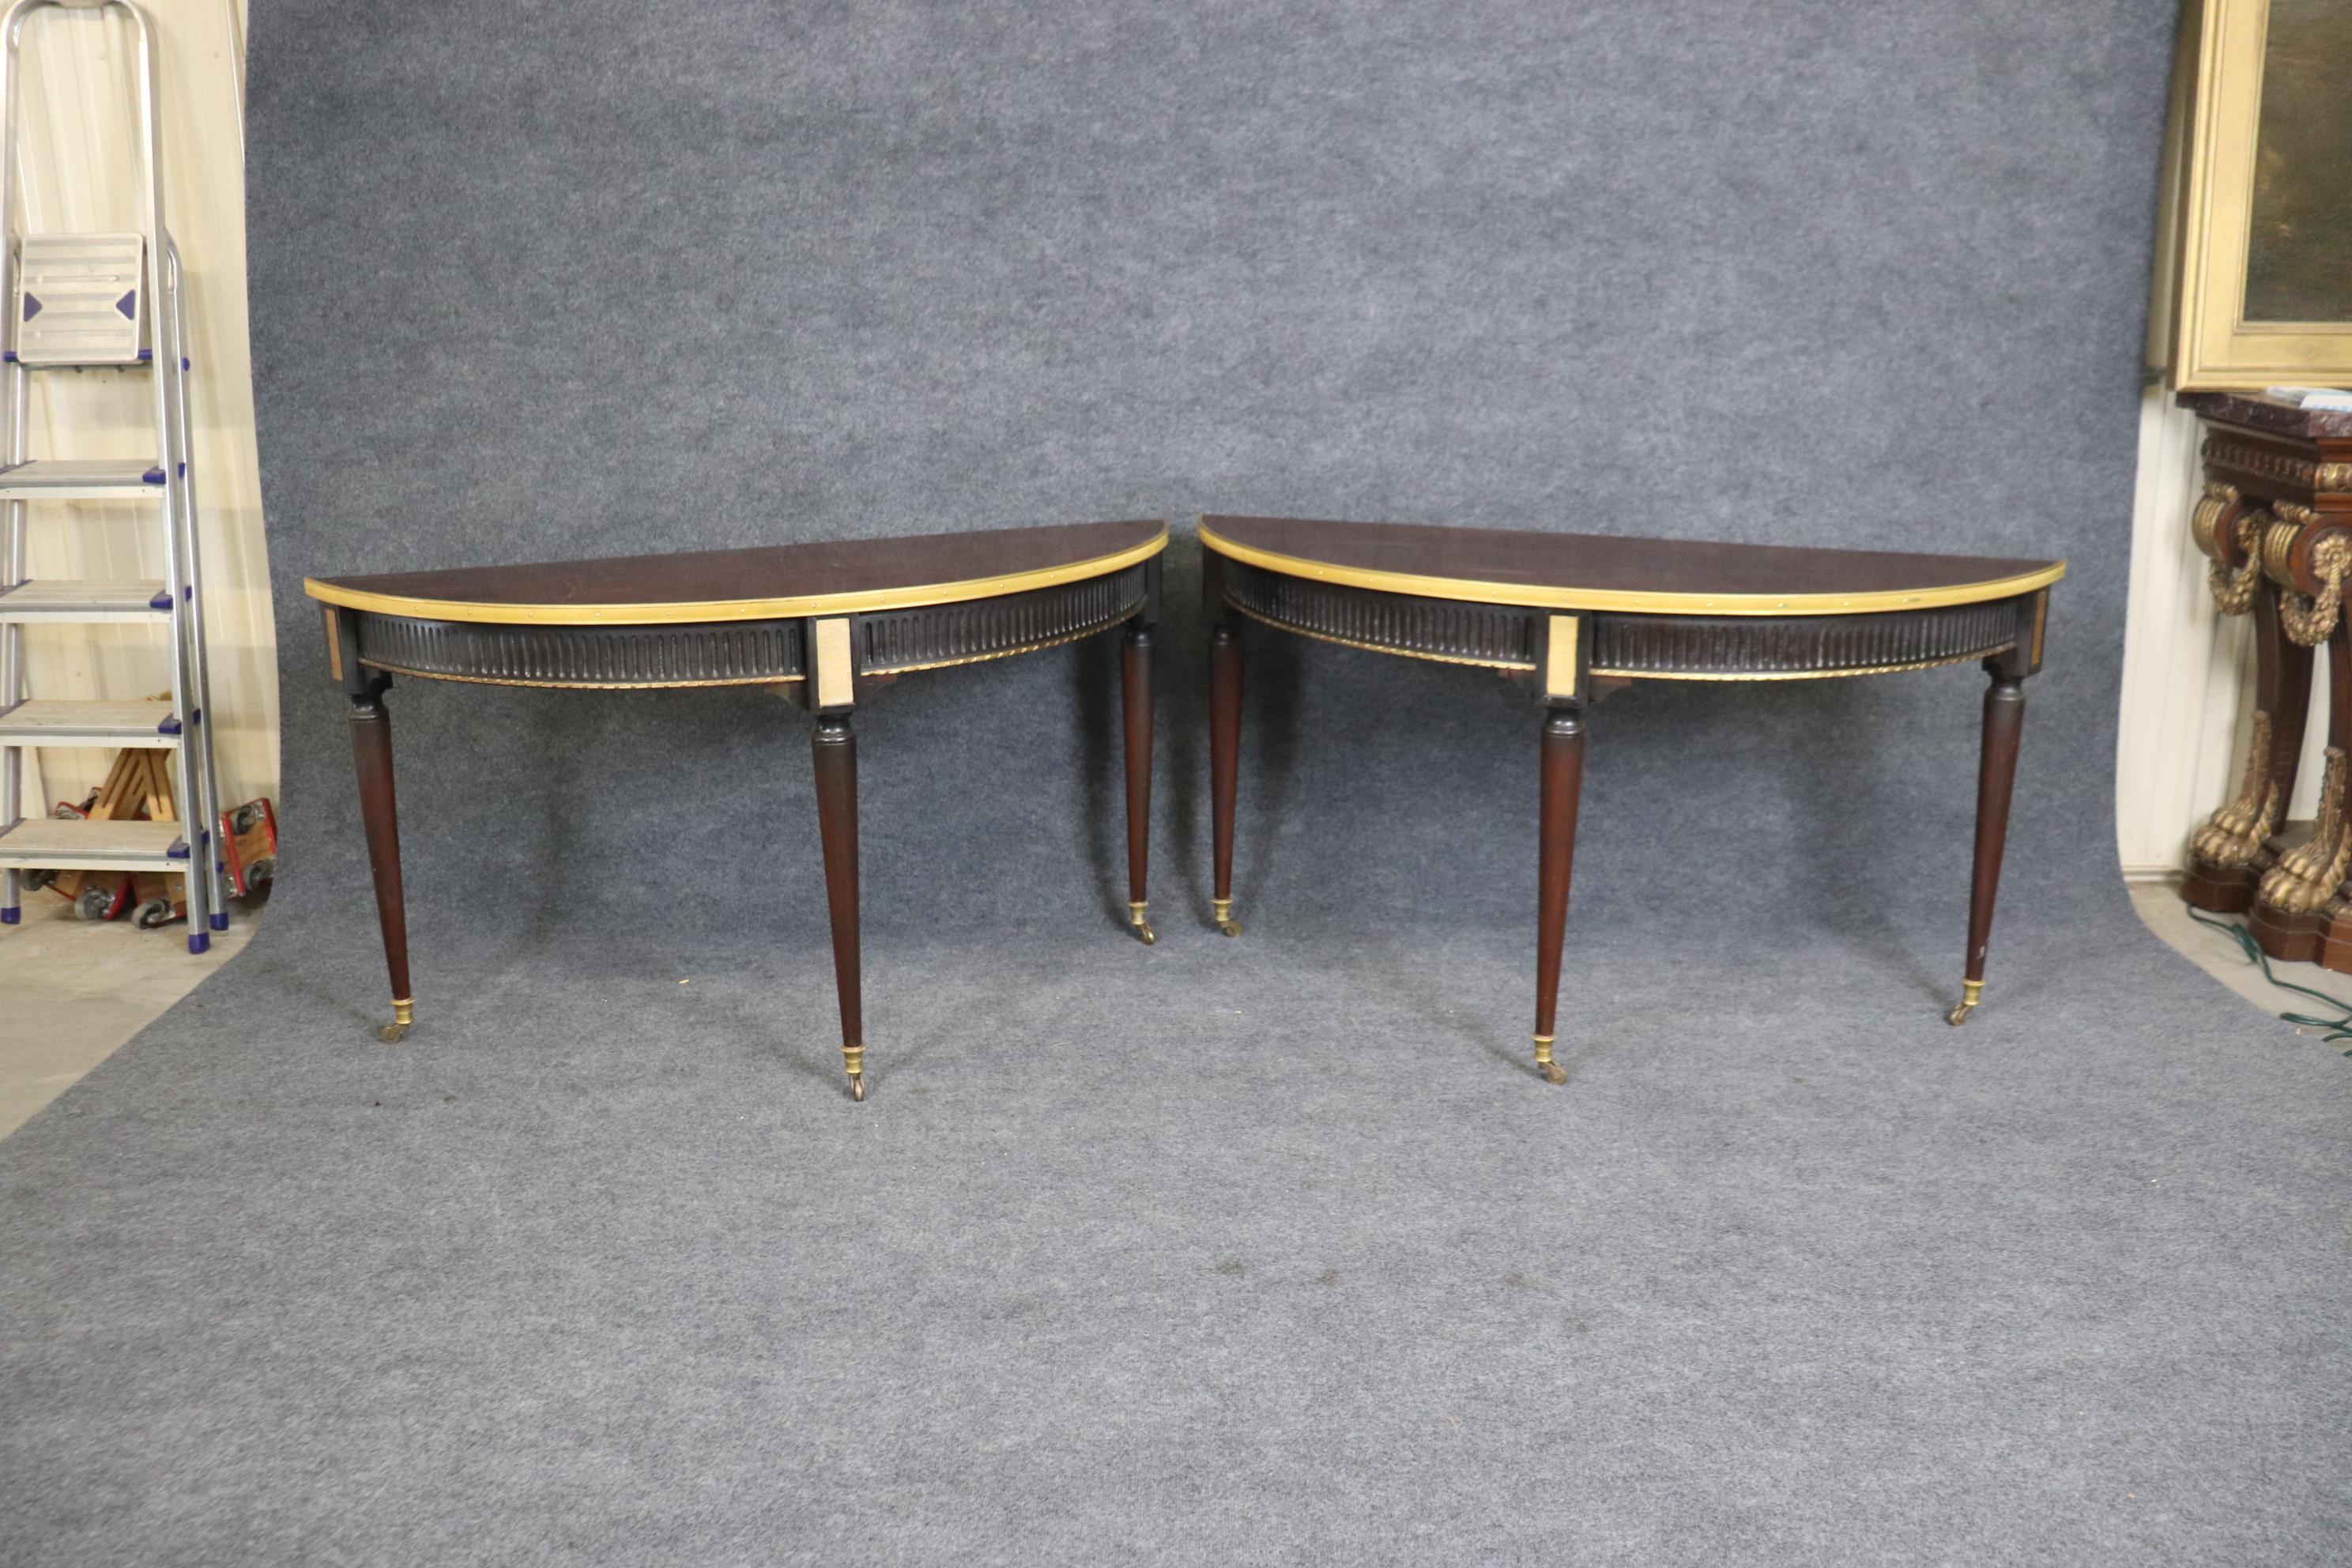 This is a gorgeous paid of beautiful mahogany and brass bound and ormolu demilune consoles. They each measures 58 wide x 22.25 deep x 31.25 tall. The tables are in good original condition with minor signs of age and wear due to normal age and use.